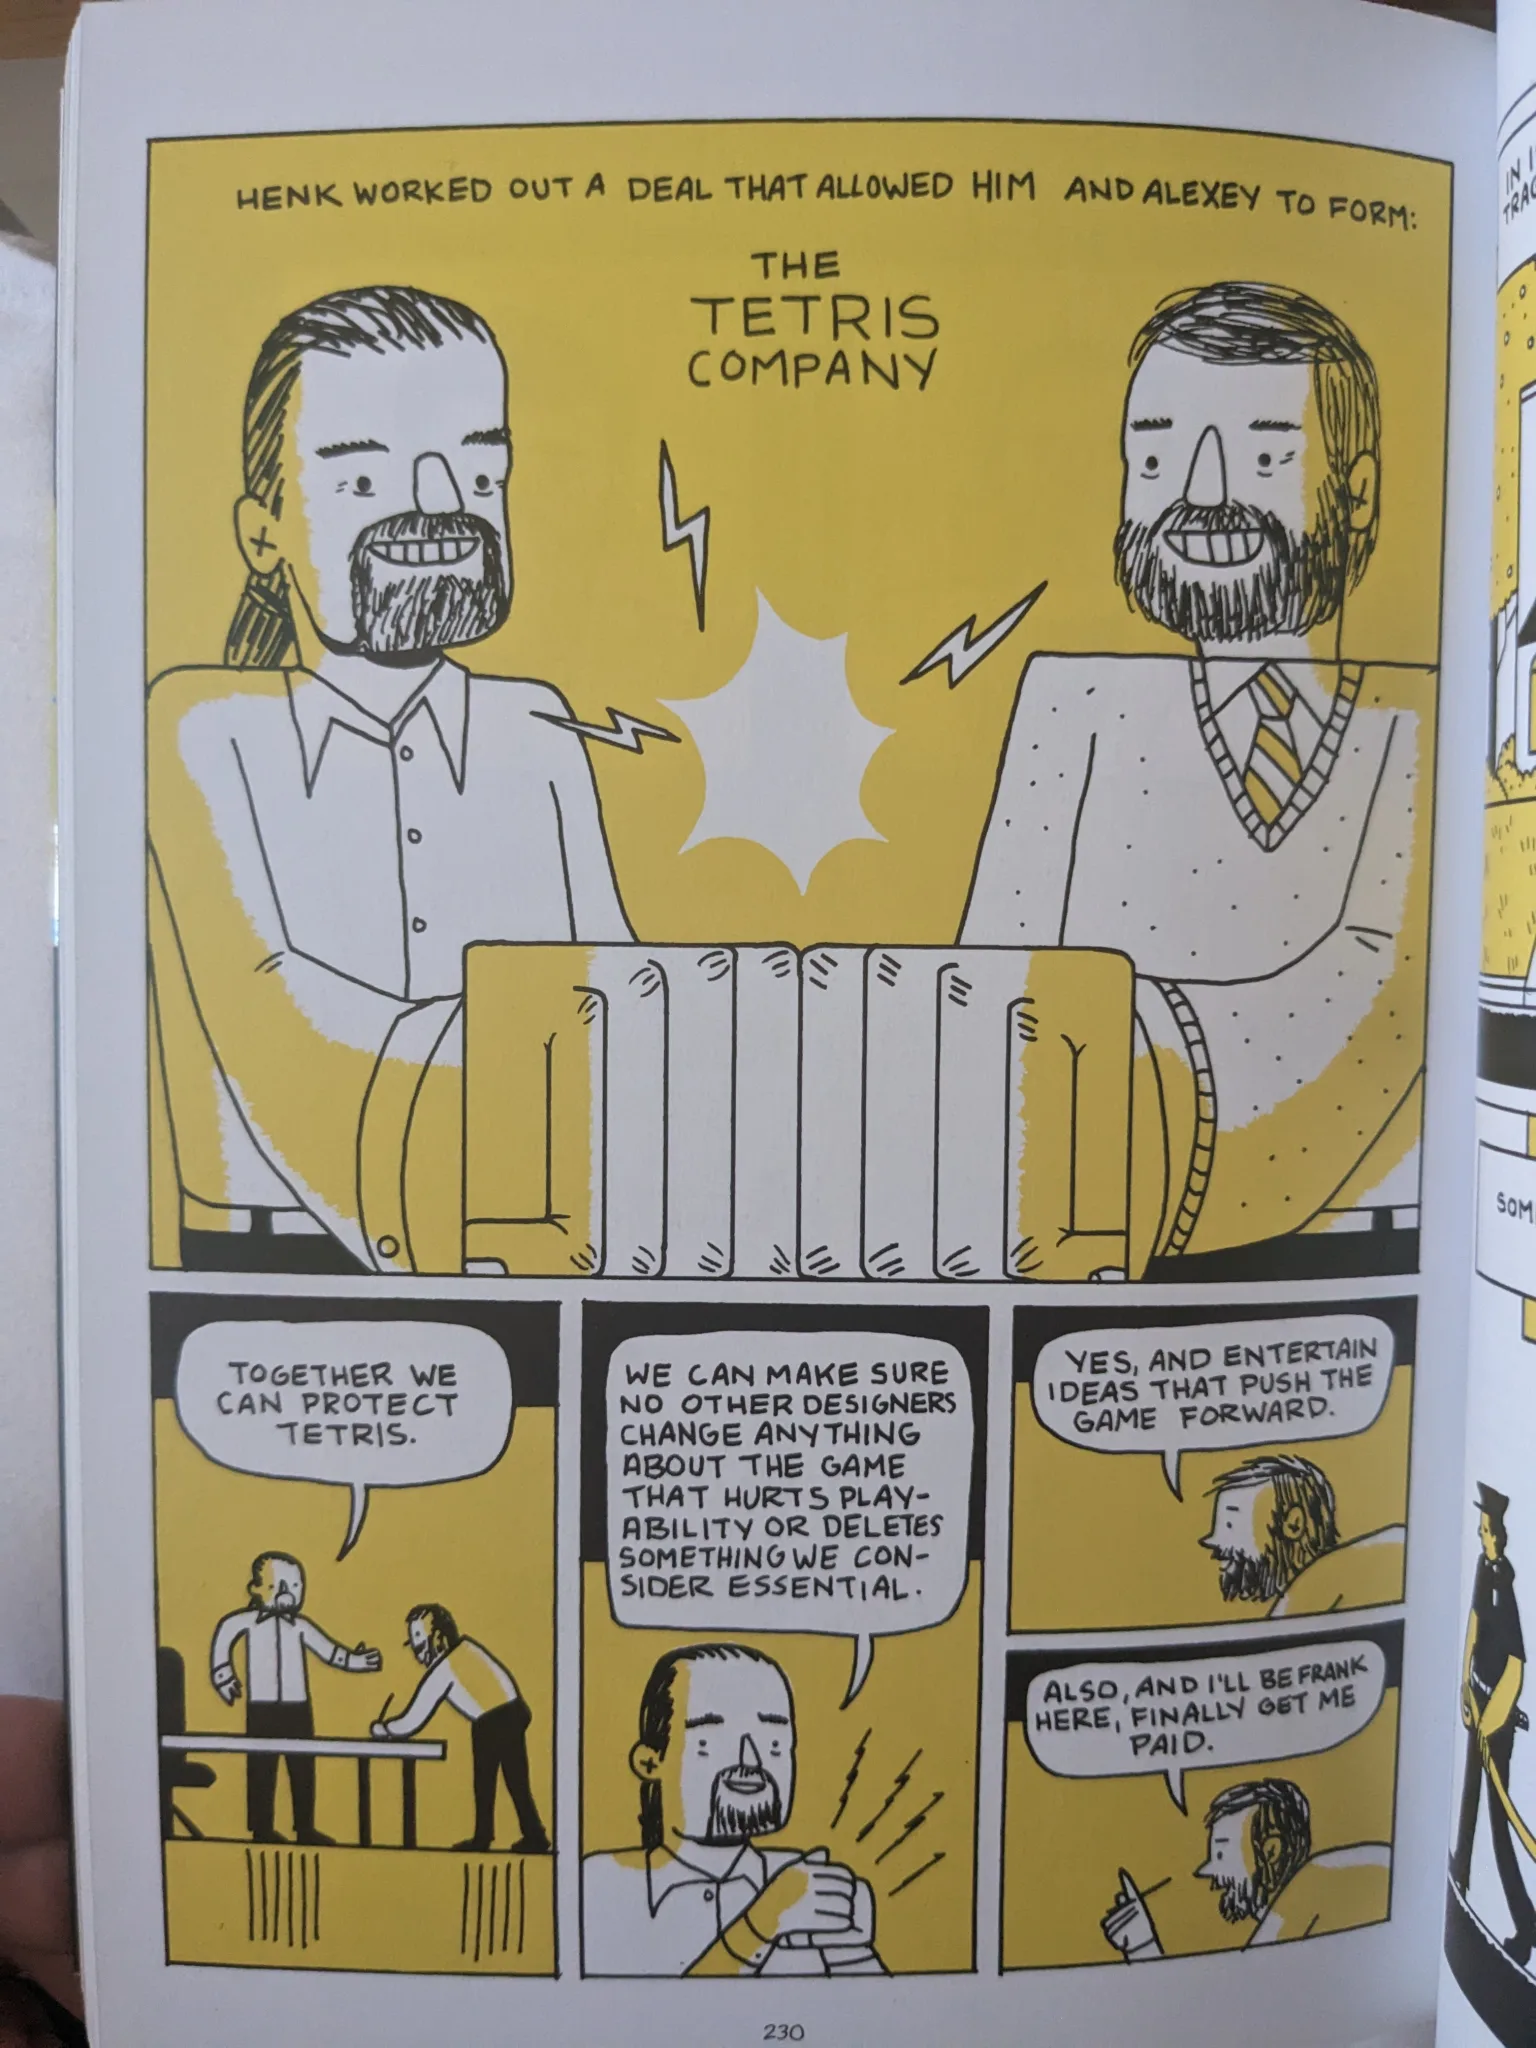 Page from 'Tetris'. The first panel takes up half the page, and shows Henk and Alexey putting their fists together under the text: 'Henk worked out a deal that allowed him and Alexey to form: The Tetris Company'. The subsequent panels are smaller and depict a conversation:
Henk: Together we can protect Tetris. We can make sure no other designers change anything about the game that hurts playability or deletes something we consider essential.
Alexey: Yes, and entertain ideas that push the game forward. Also, and I'll be frank here, finally get me paid.